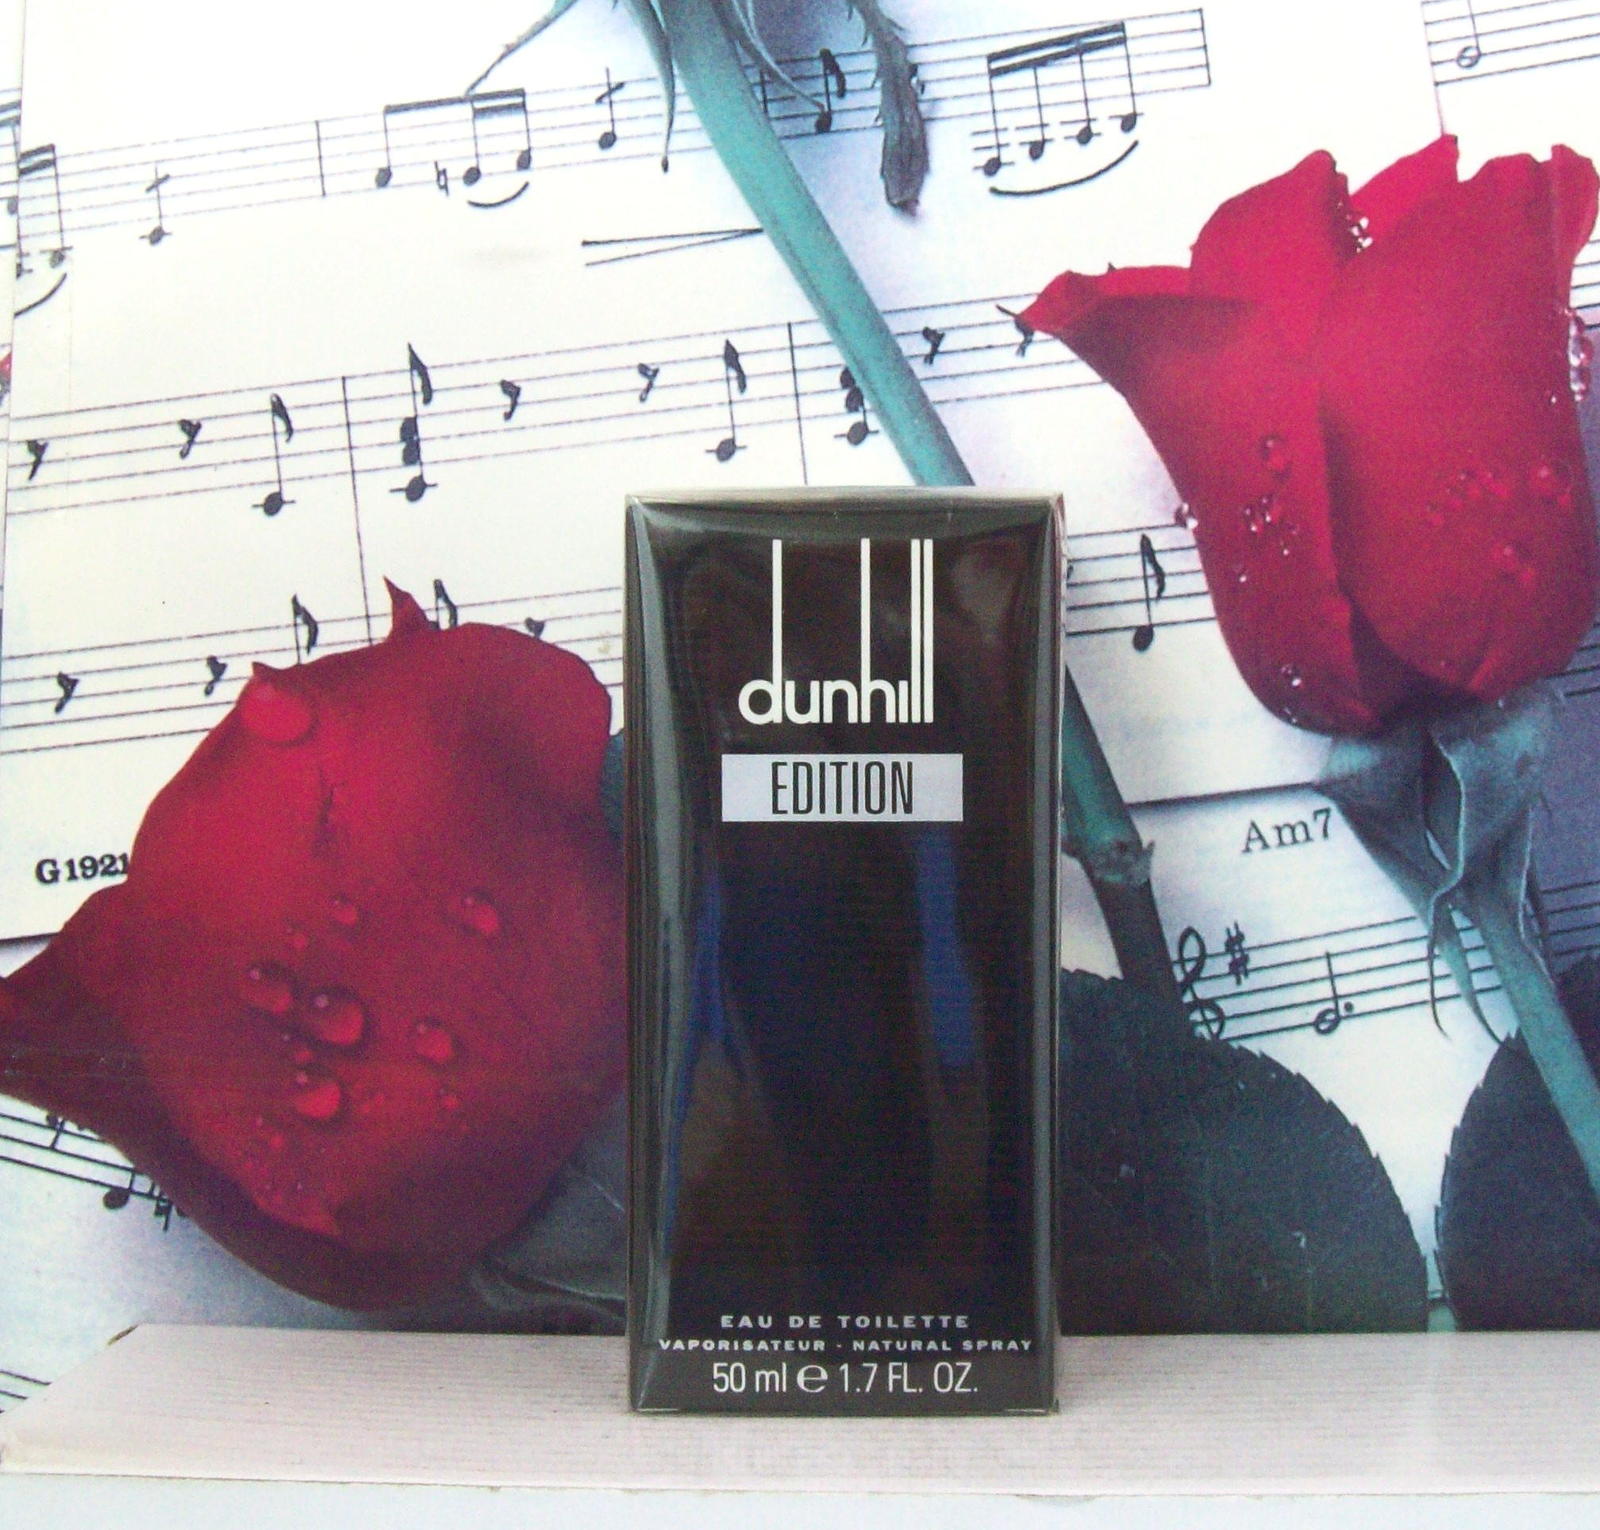 Primary image for Dunhill Edition EDT Spray 1.7 FL. OZ. NWB.  